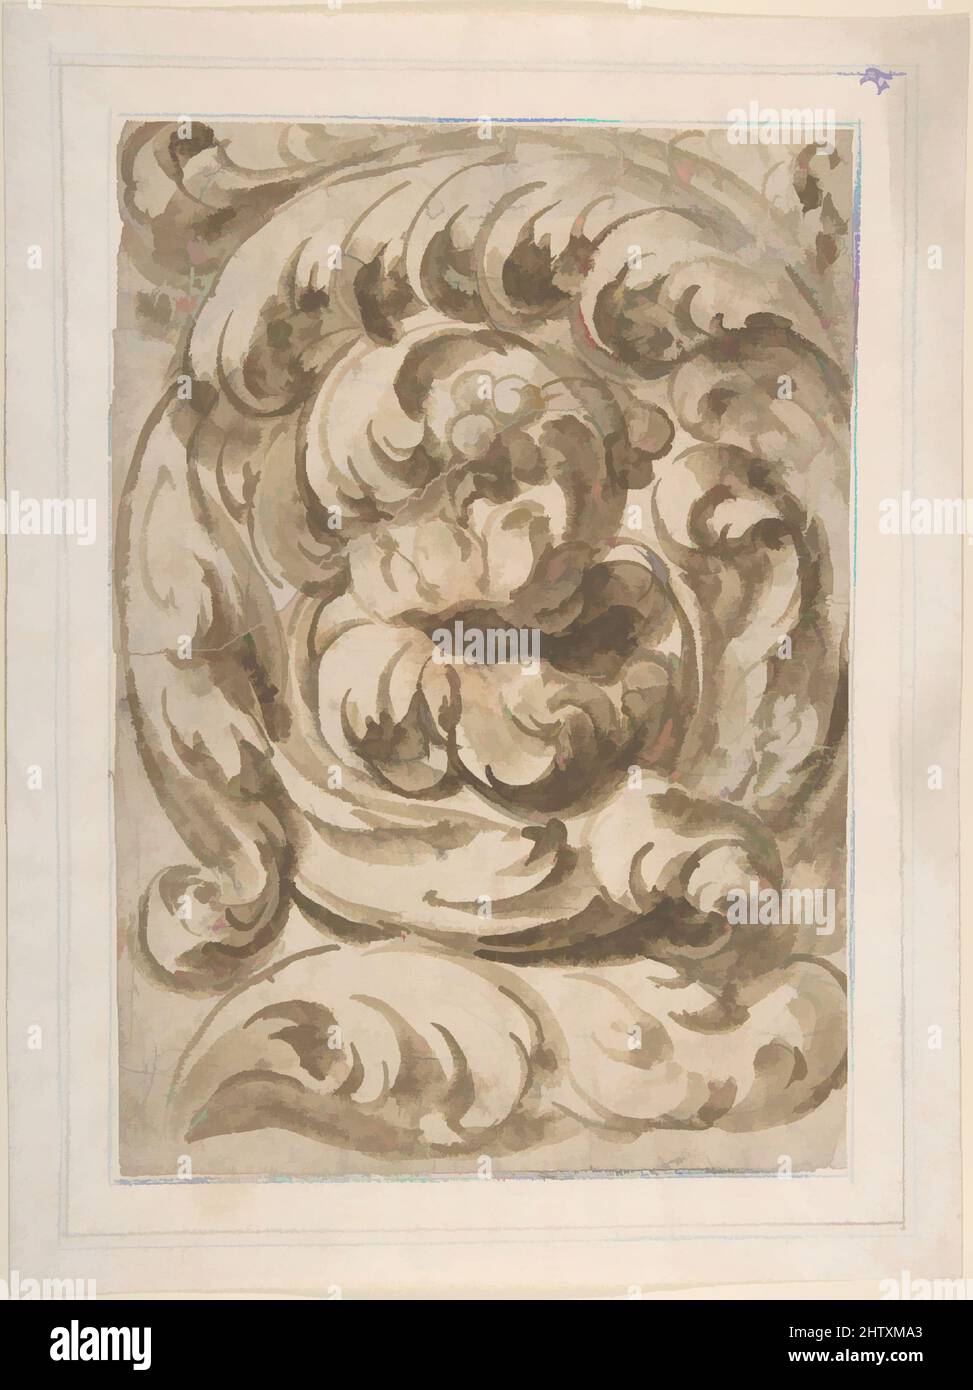 Art inspired by Acanthus Scroll, 17th century, Brush and brown wash, over graphite or black chalk underdrawing, image: 11 15/16 x 8 3/8 in. (30.4 x 21.2 cm), Anonymous, Italian, 17th century, Classic works modernized by Artotop with a splash of modernity. Shapes, color and value, eye-catching visual impact on art. Emotions through freedom of artworks in a contemporary way. A timeless message pursuing a wildly creative new direction. Artists turning to the digital medium and creating the Artotop NFT Stock Photo